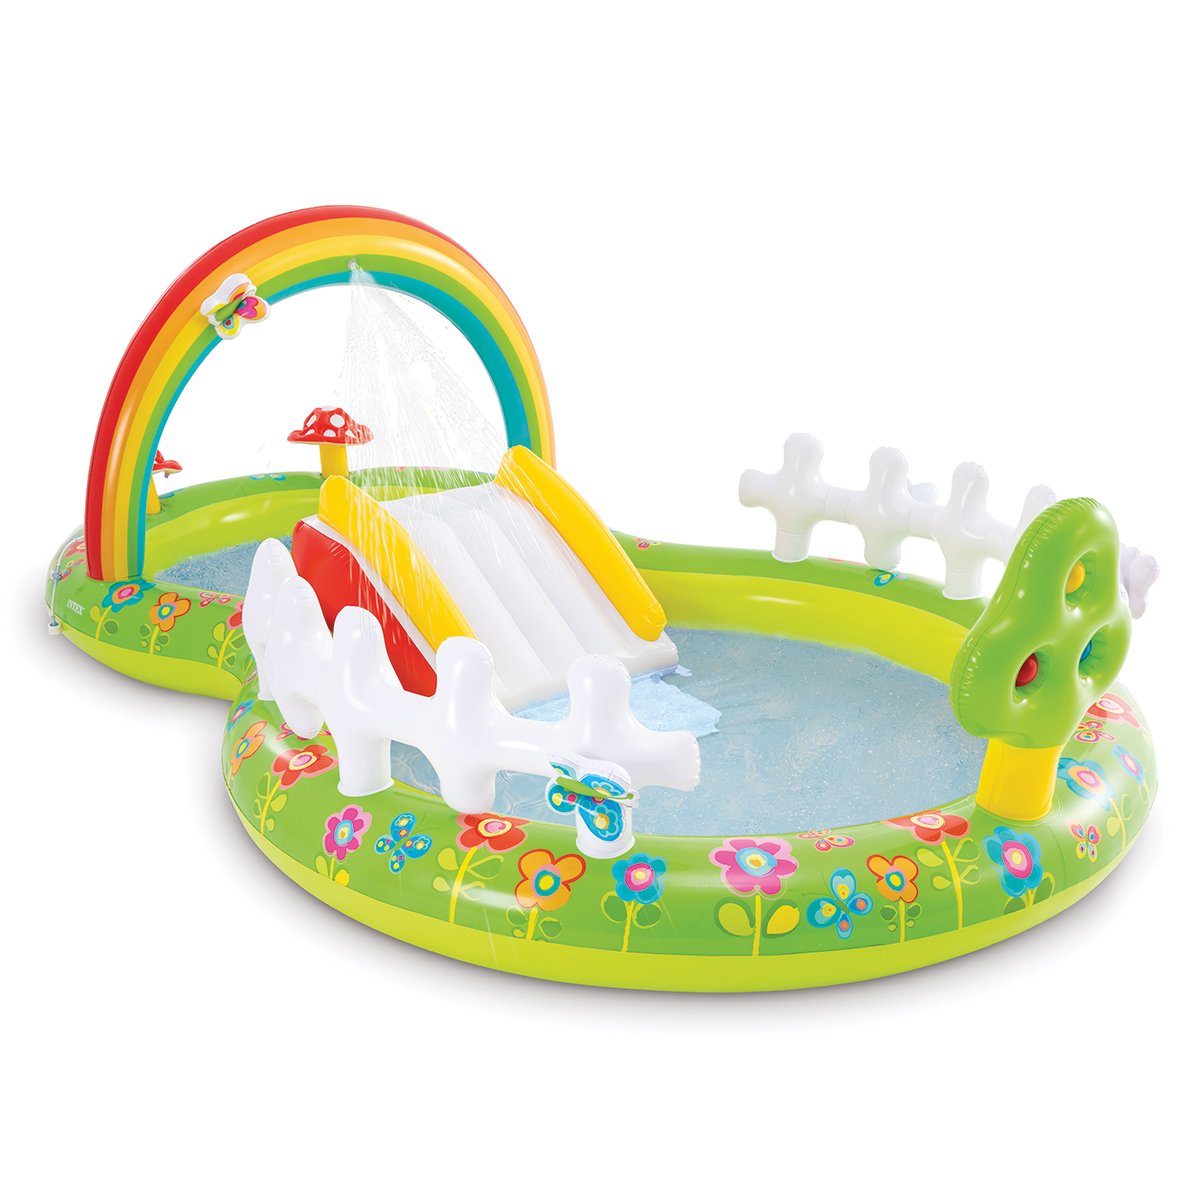 Intex 57154NP Inflatable Garden Kids Play Centre Water Slide Pool 1